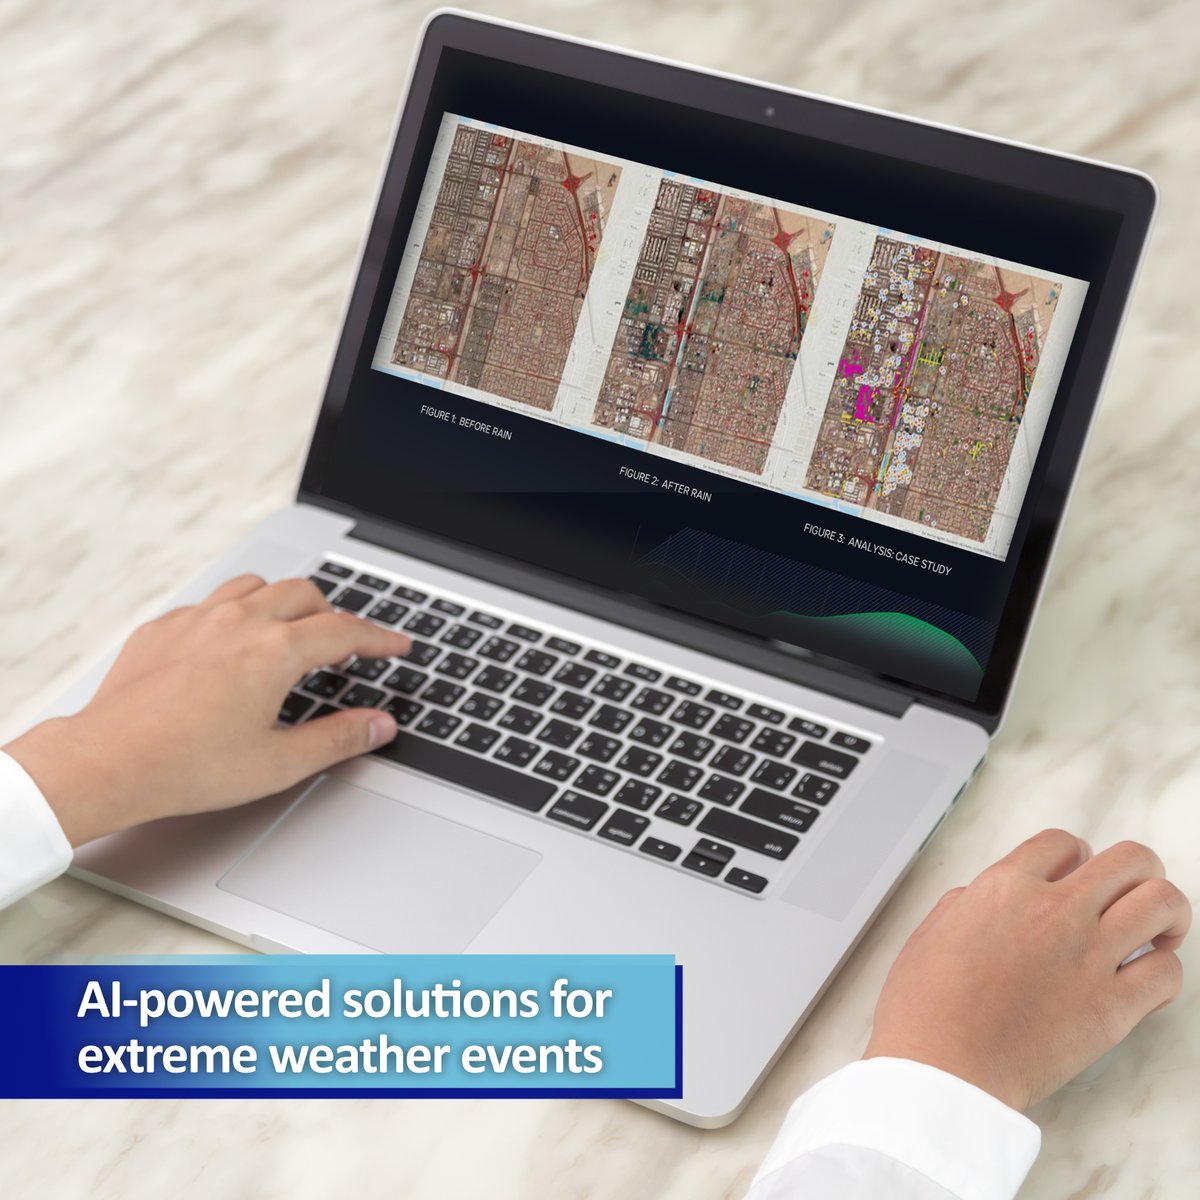 The recent floods in the #Gulf region and other extreme weather events due to climate change have offered insights into how #AI-powered solutions can improve global urban planning thanks to #MBZUAI’s latest research. Dr. Salman Khan, associate professor of computer vision, and a